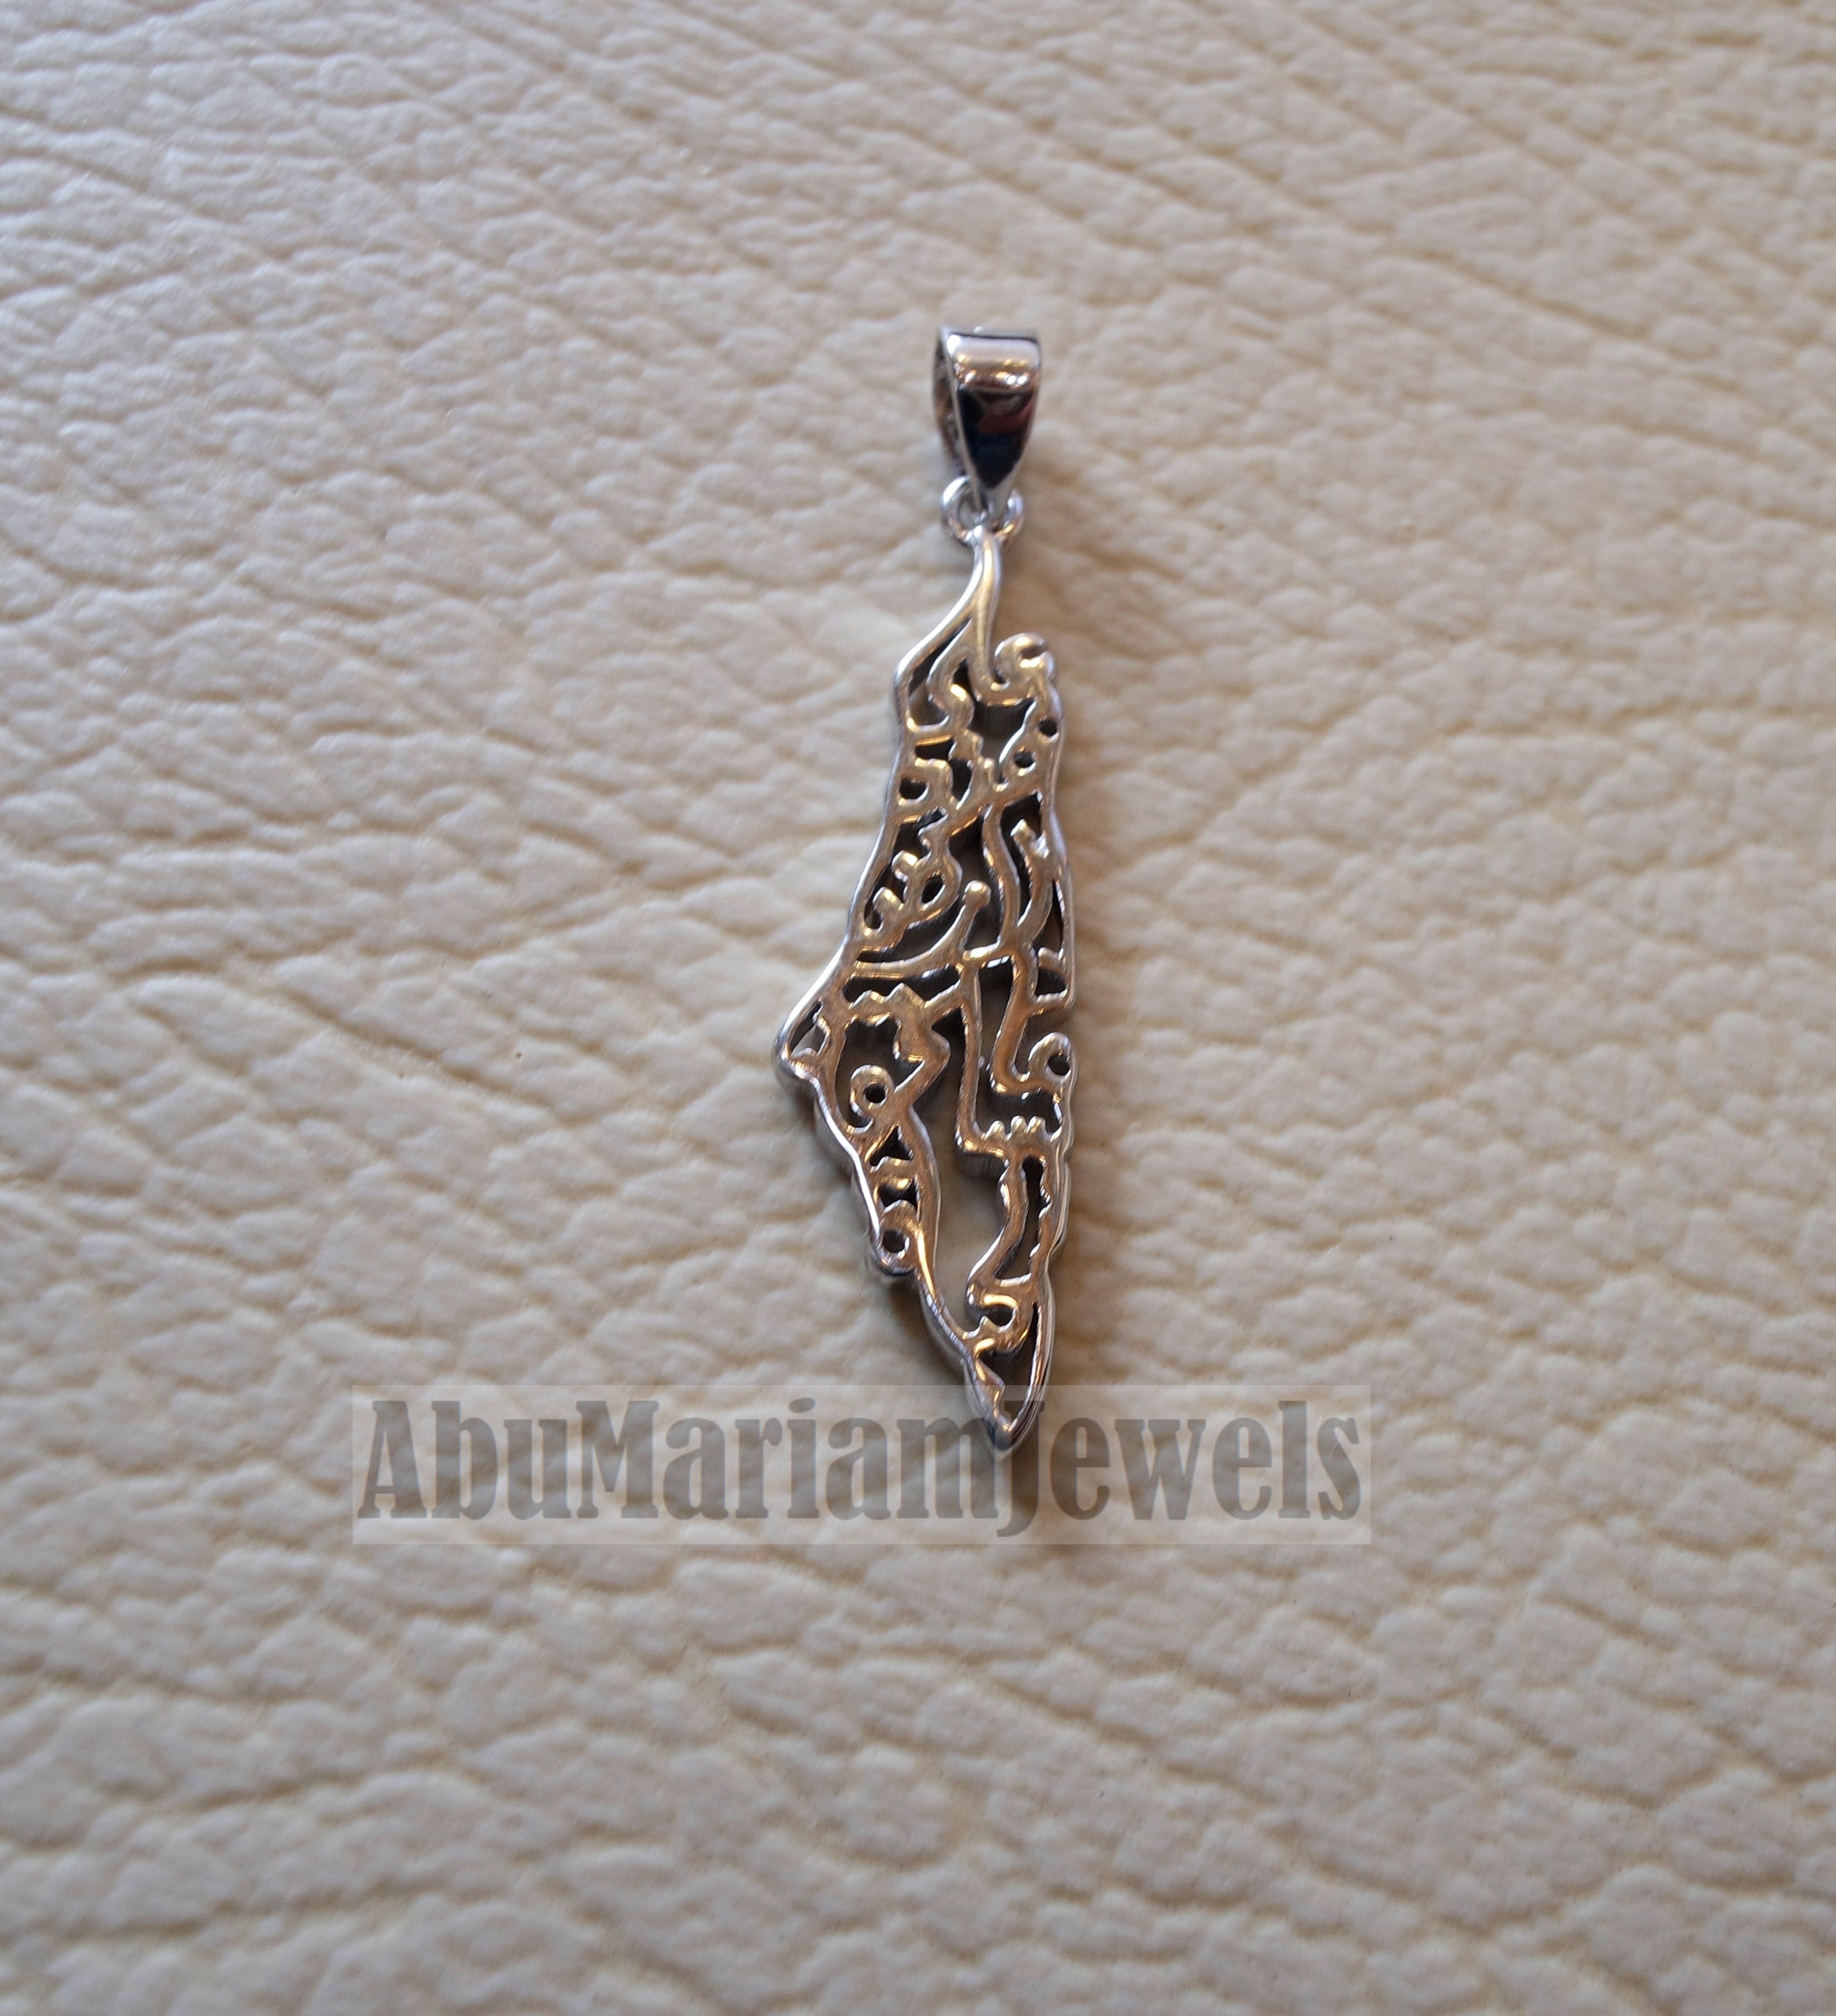 Palestine map very small pendant with famous poem verse sterling silver 925 k high quality jewelry arabic fast shipping خارطه و علم فلسطين